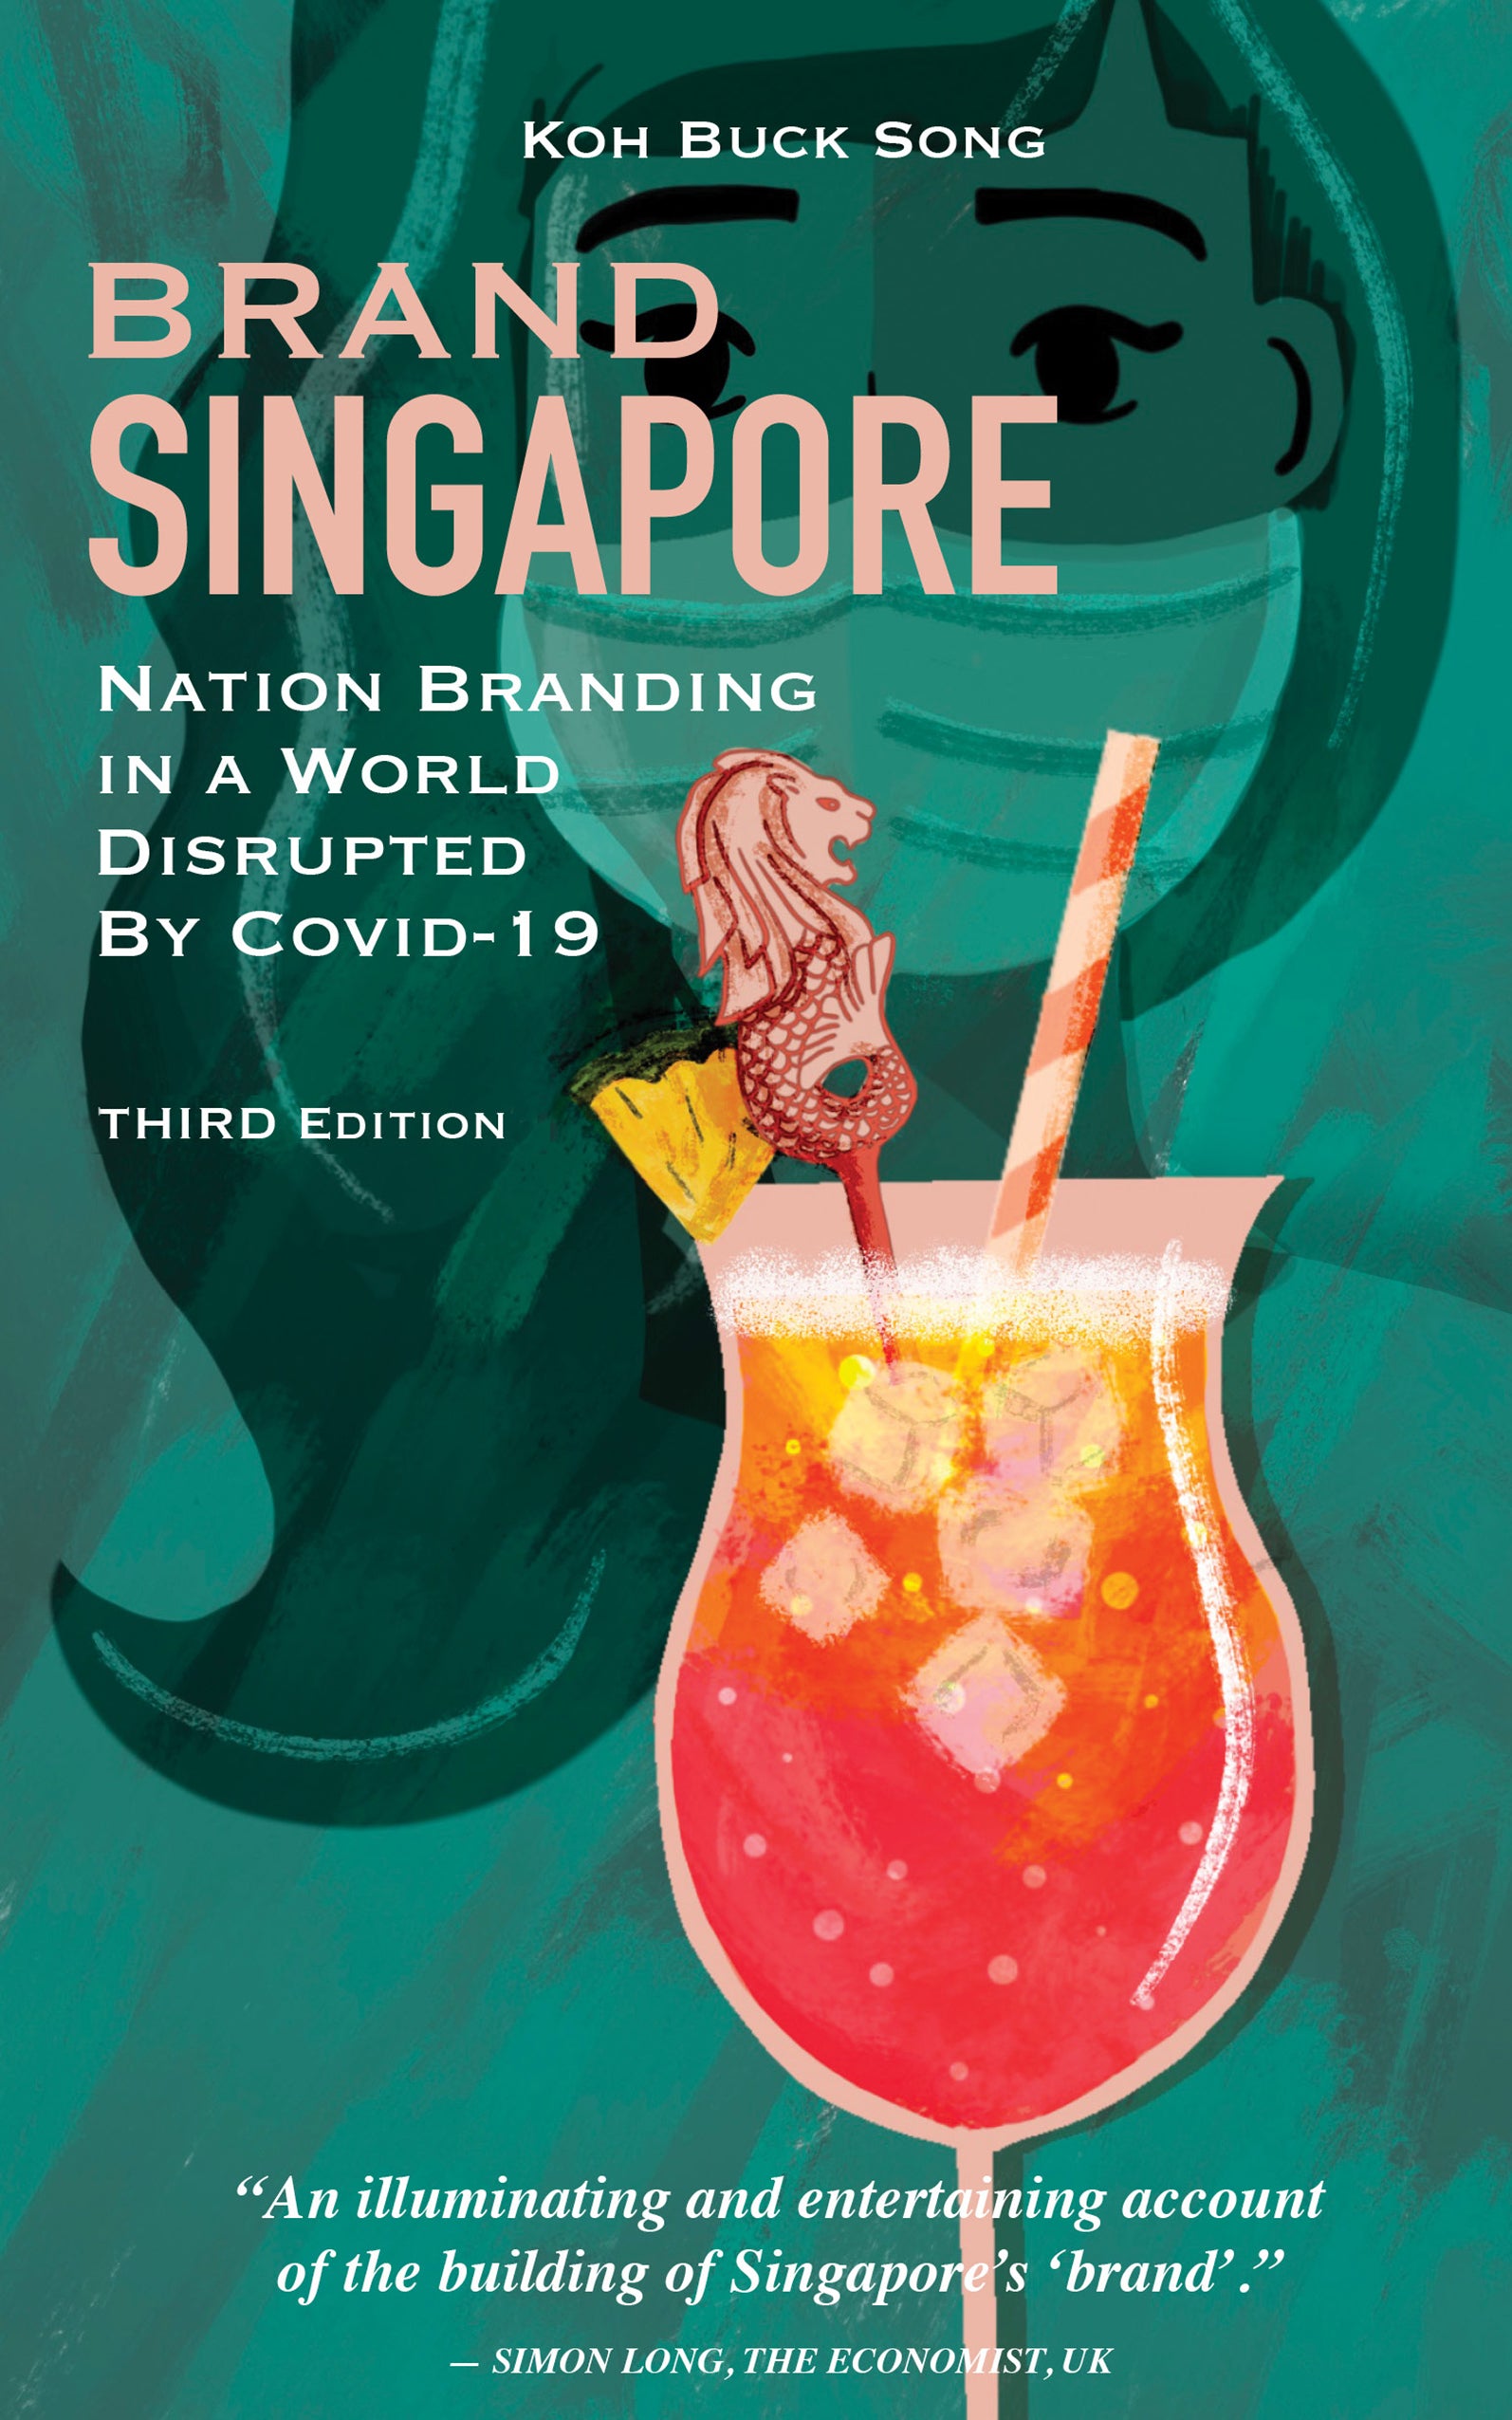 Brand Singapore: Nation Branding in a World Disrupted  by Covid-19 (Third Edition)